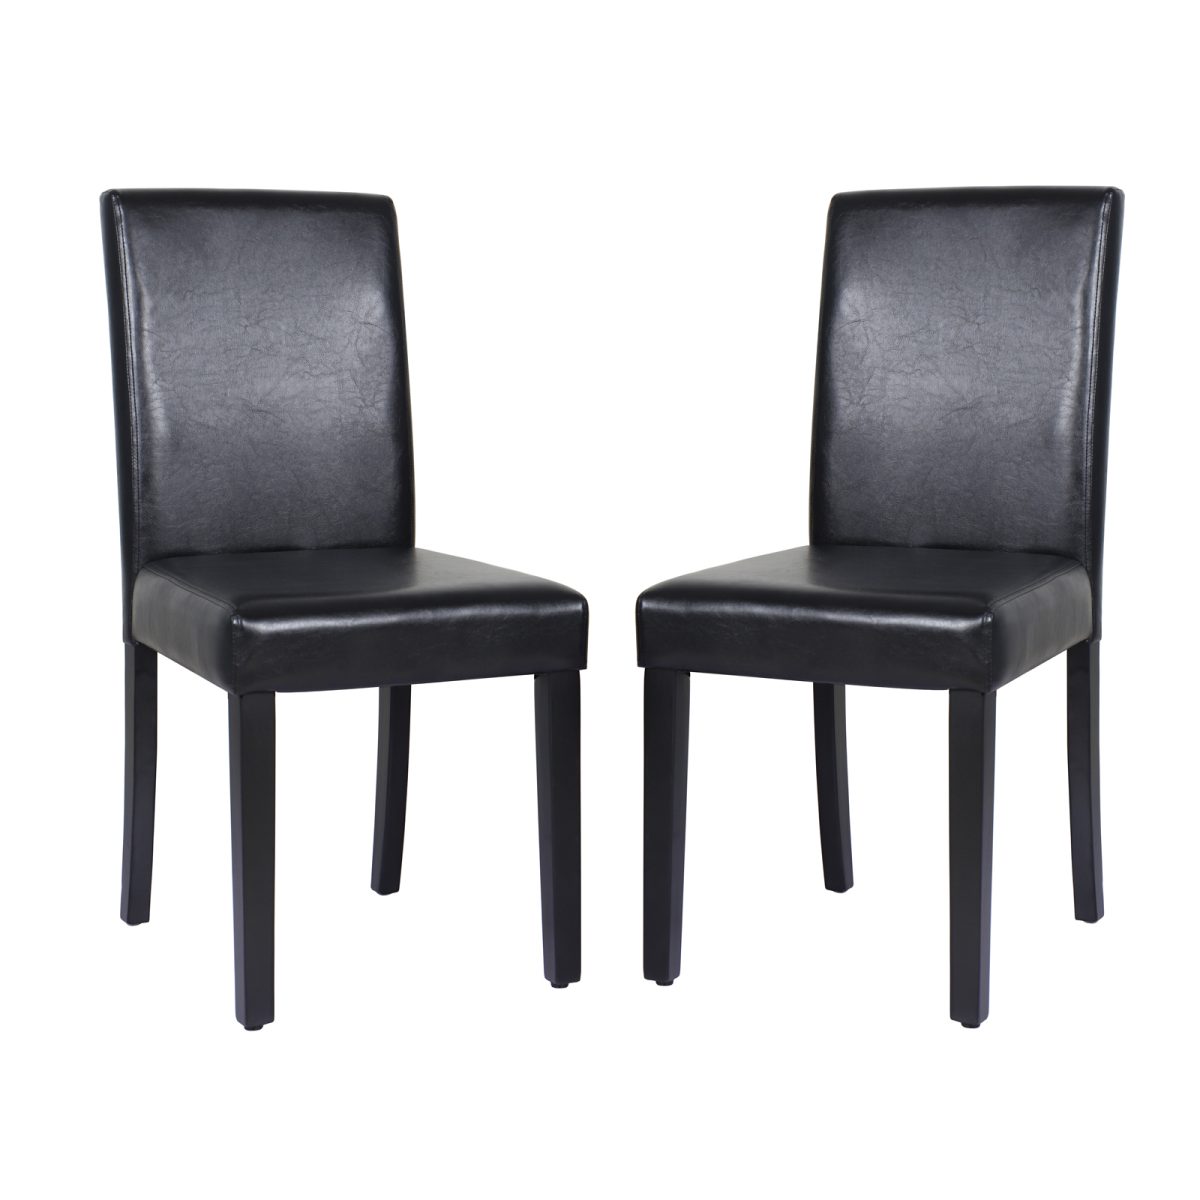 2 X Montina Dining Chair